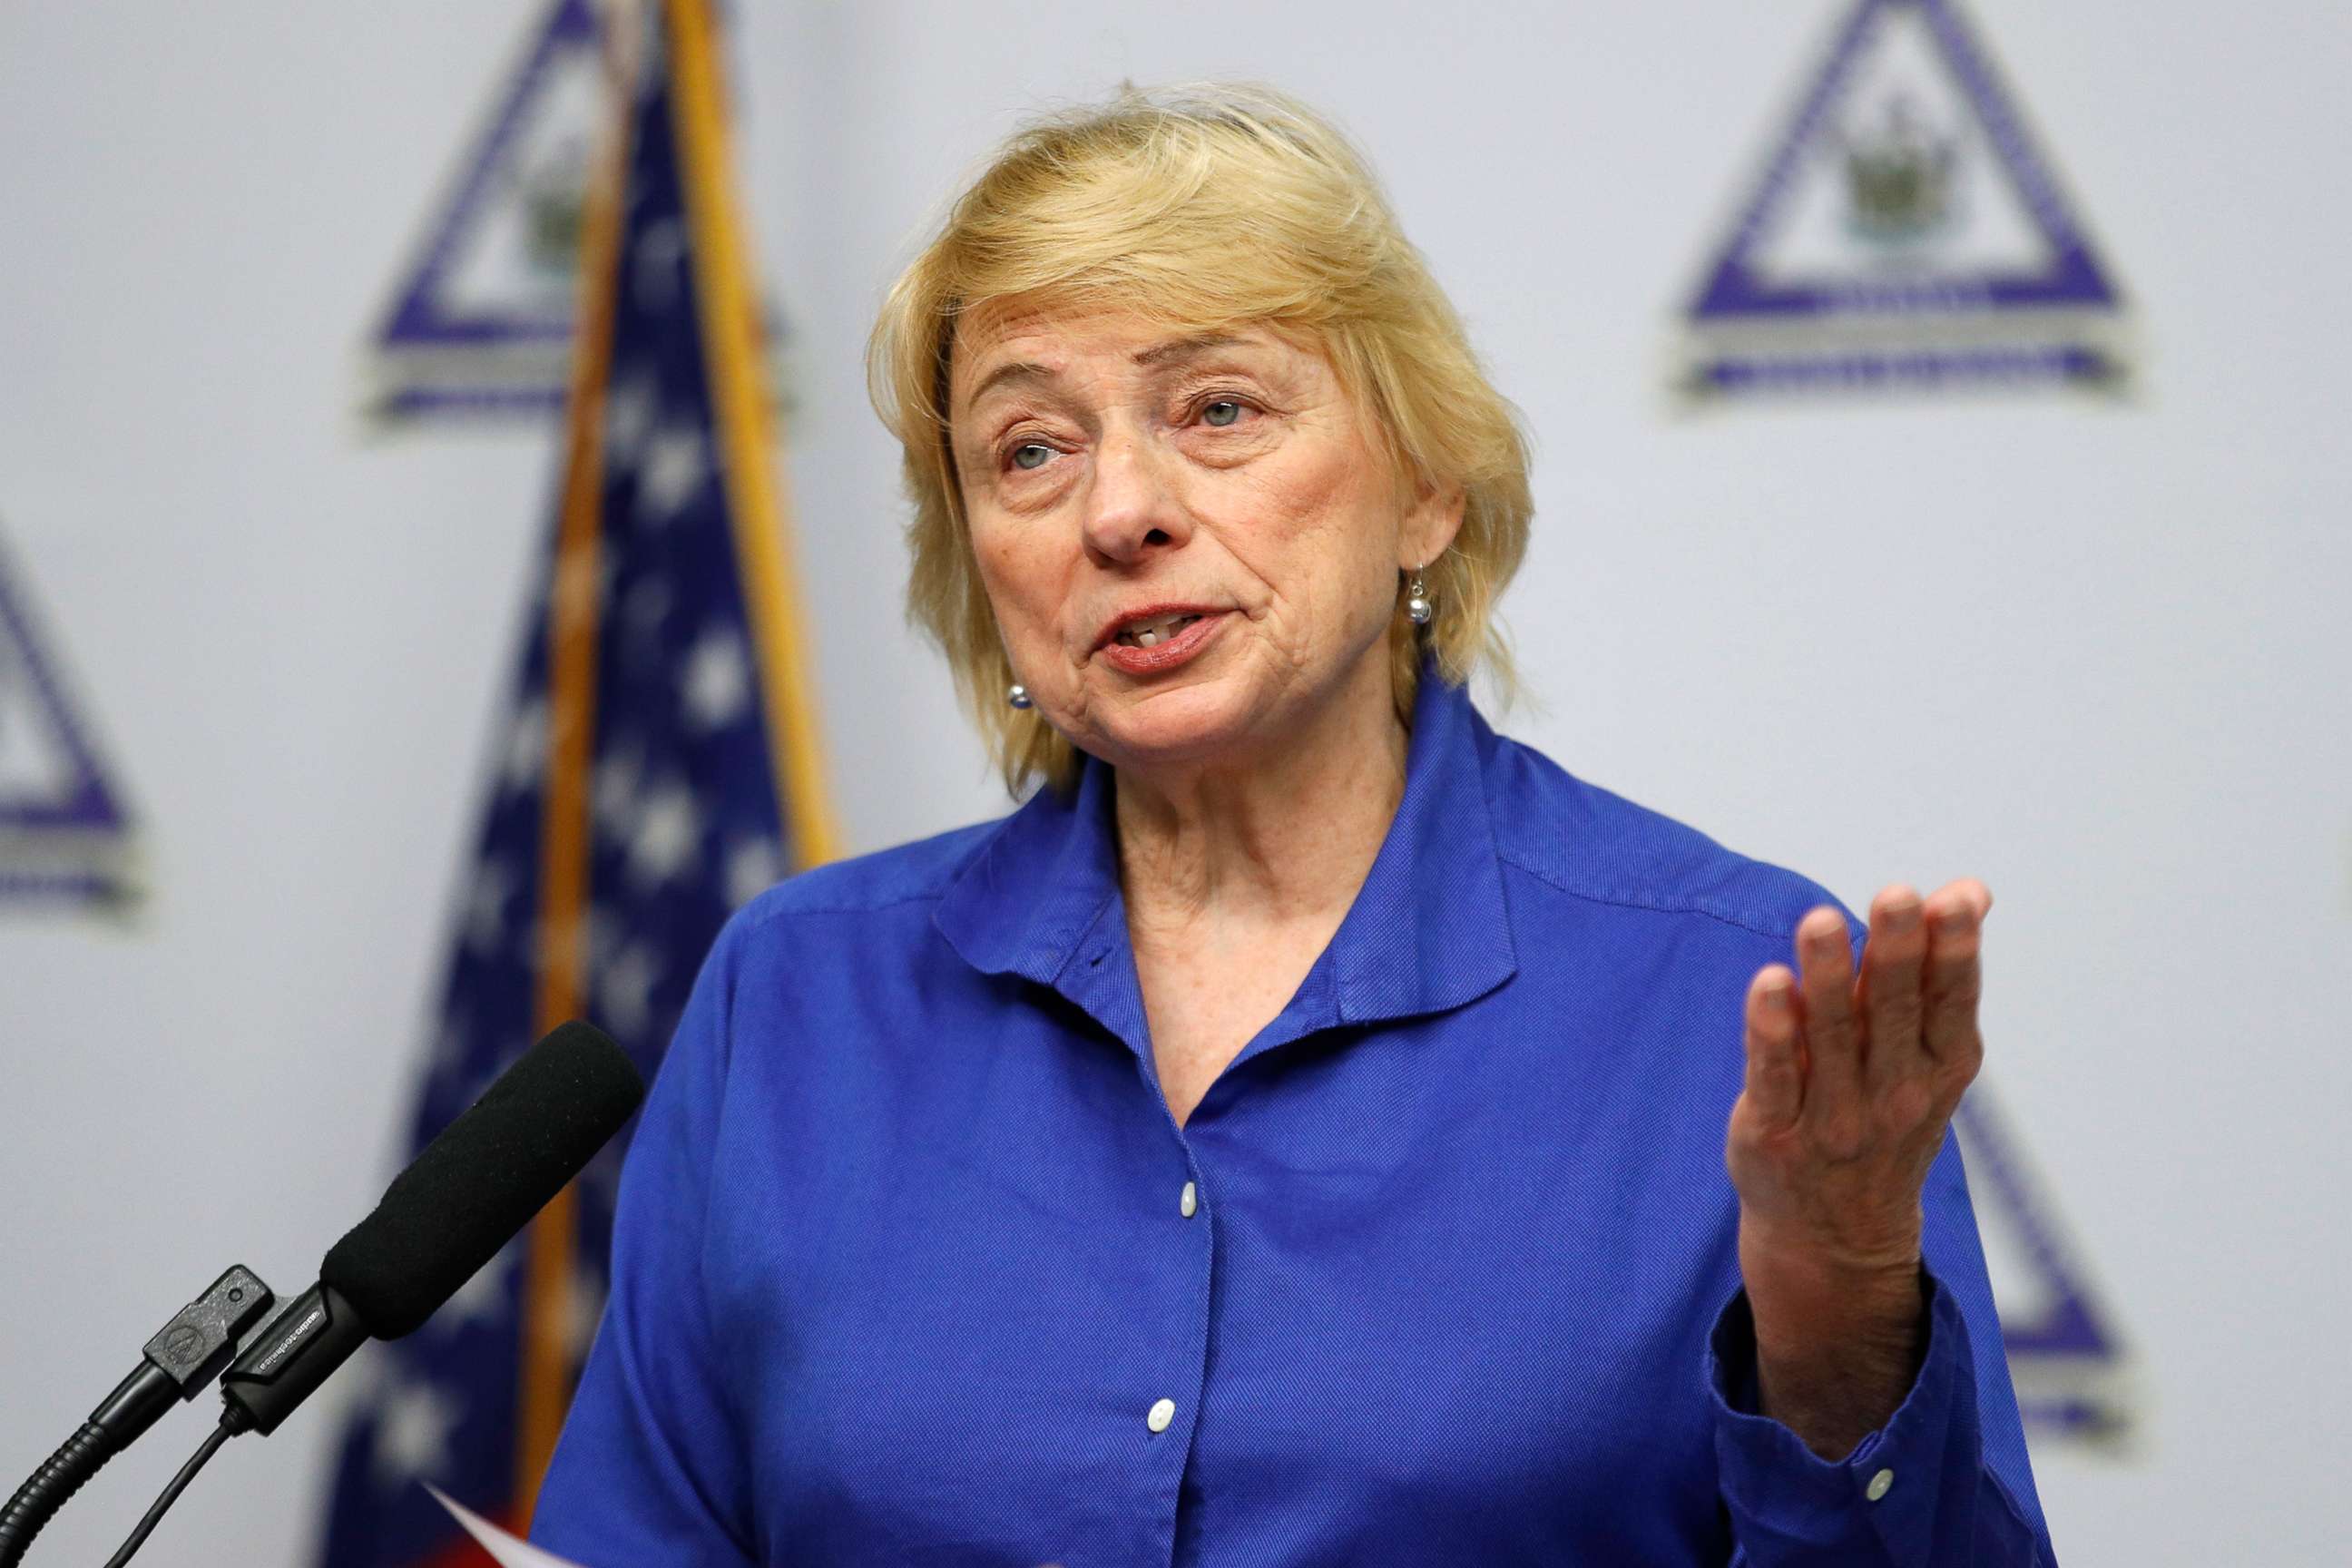 PHOTO: Maine Gov. Janet Mills speaks at a news conference where she announced new plans for the stay-at-home order and other measures to help combat the coronavirus pandemic, April 28, 2020, in Augusta, Maine.